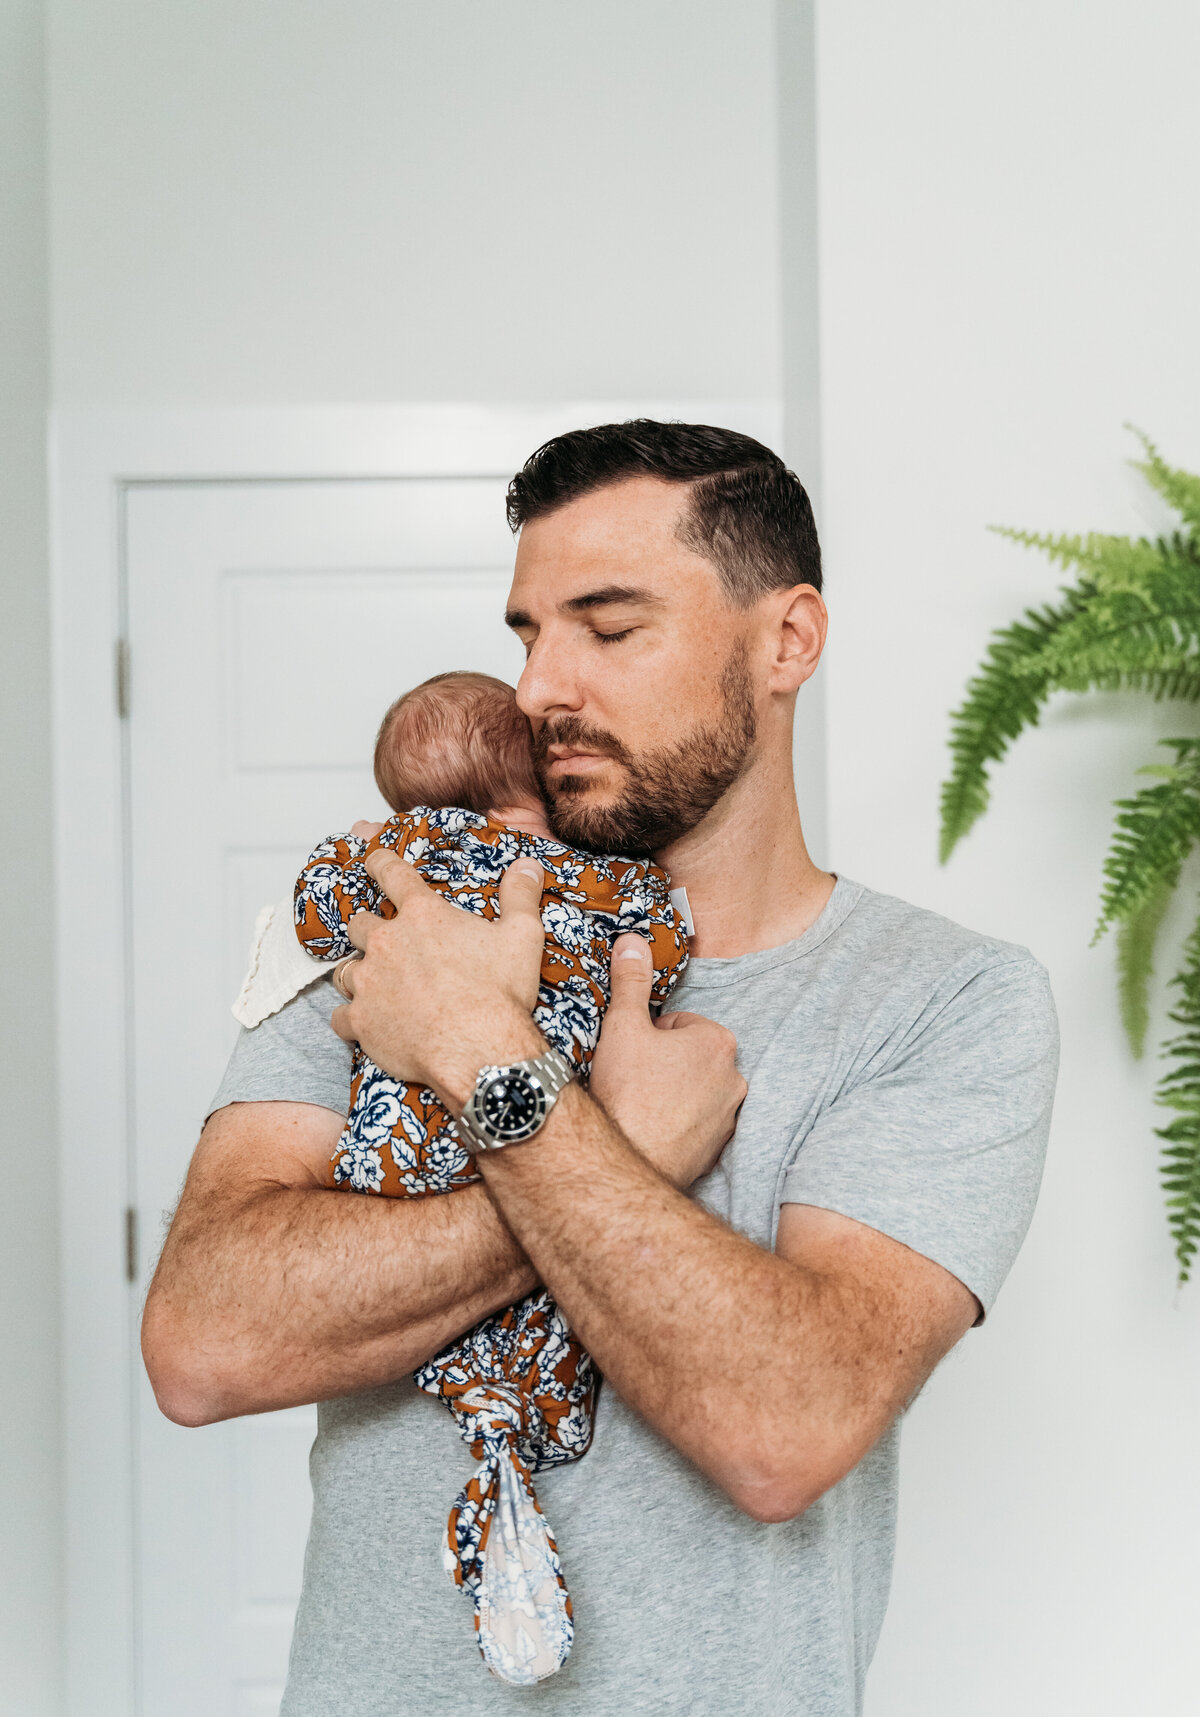 Newborn Photographer, a dad stands holding baby in his home, taking in the moment